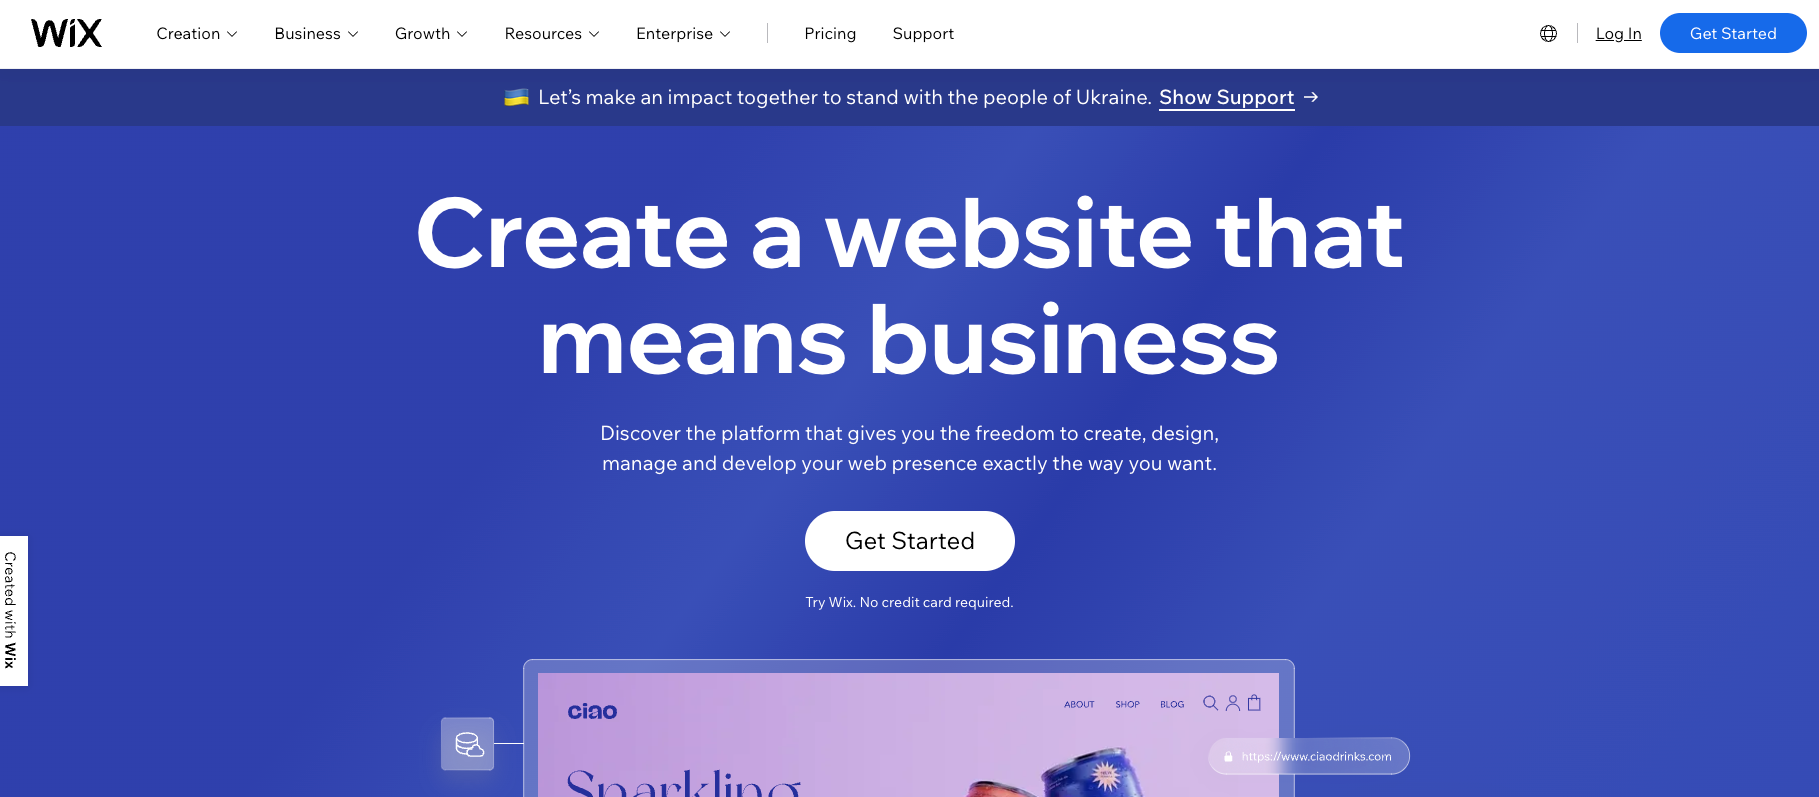 Wix lets you create any kind of website